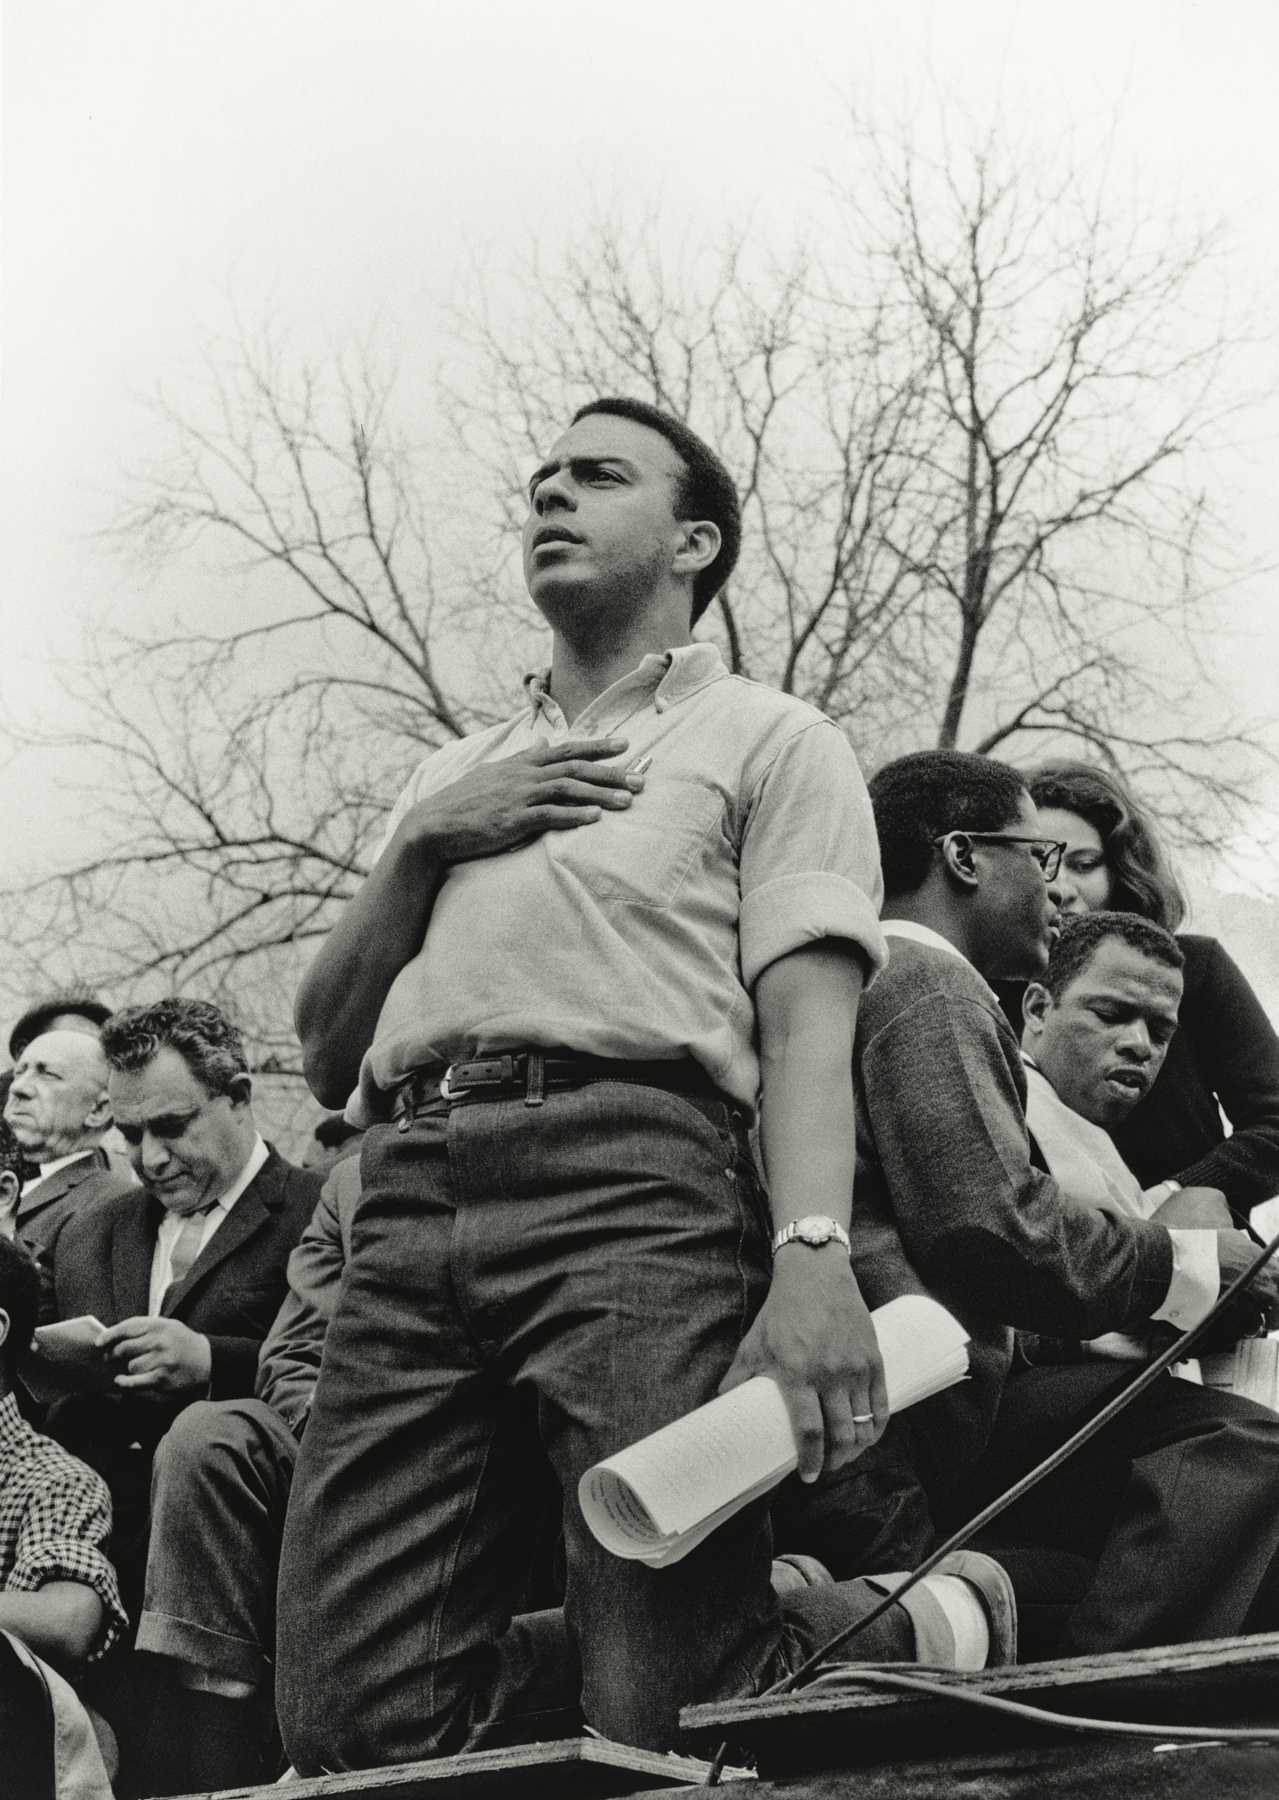 Andrew Young, hand over heart, and on knees, in contemplation, long after the National Anthem was sung, March 25, 1965